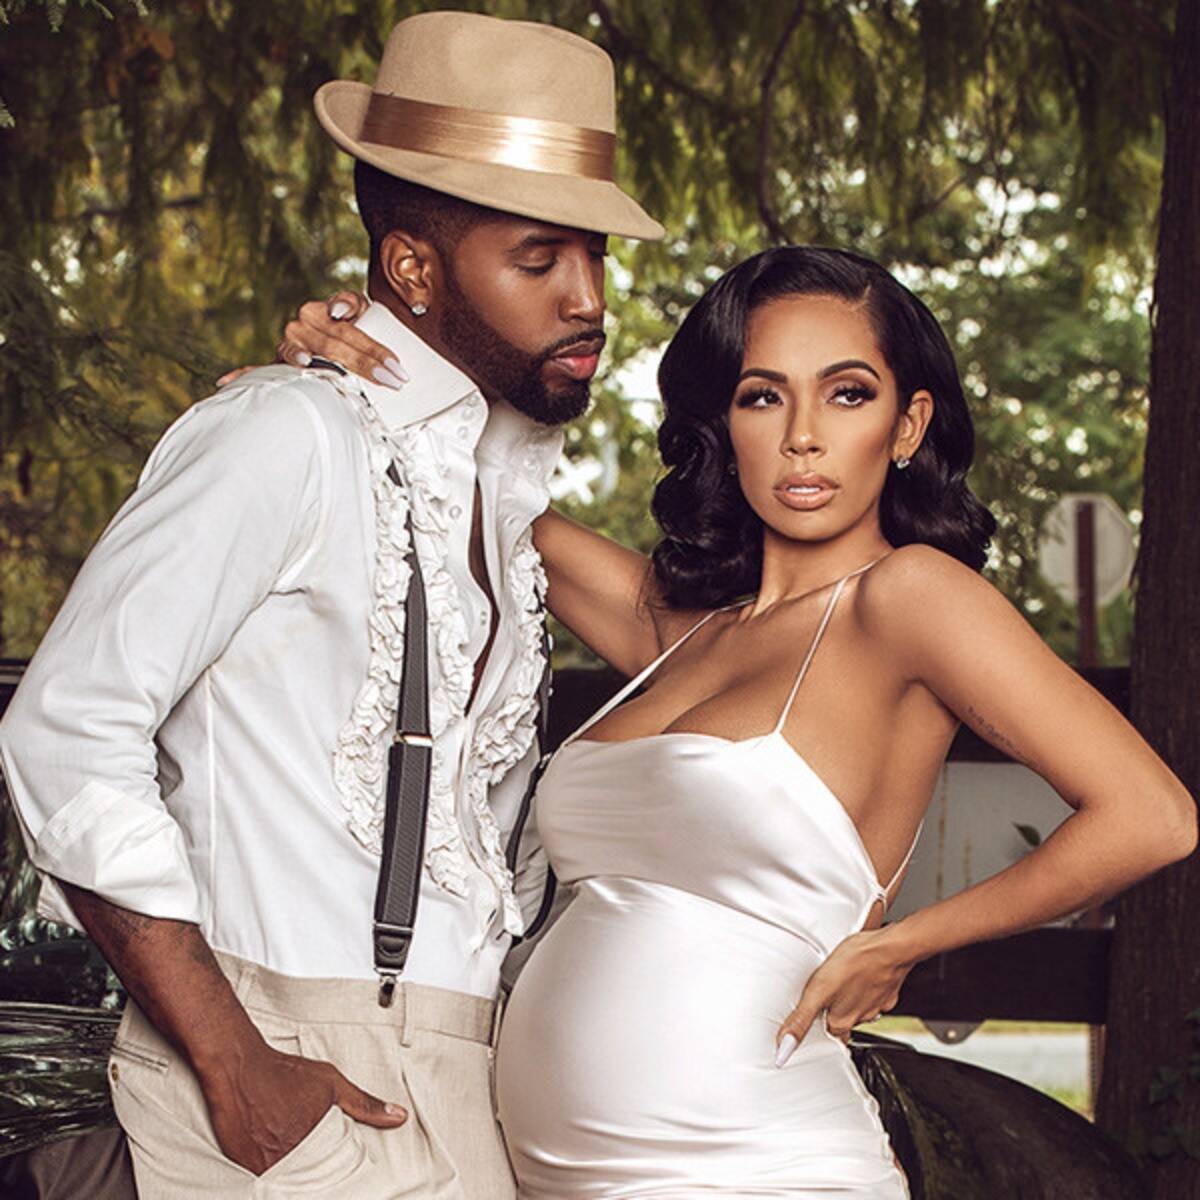 Erica Mena Wants To Make Pregnancy An Occasion For Women To Appreciate Their Bodies